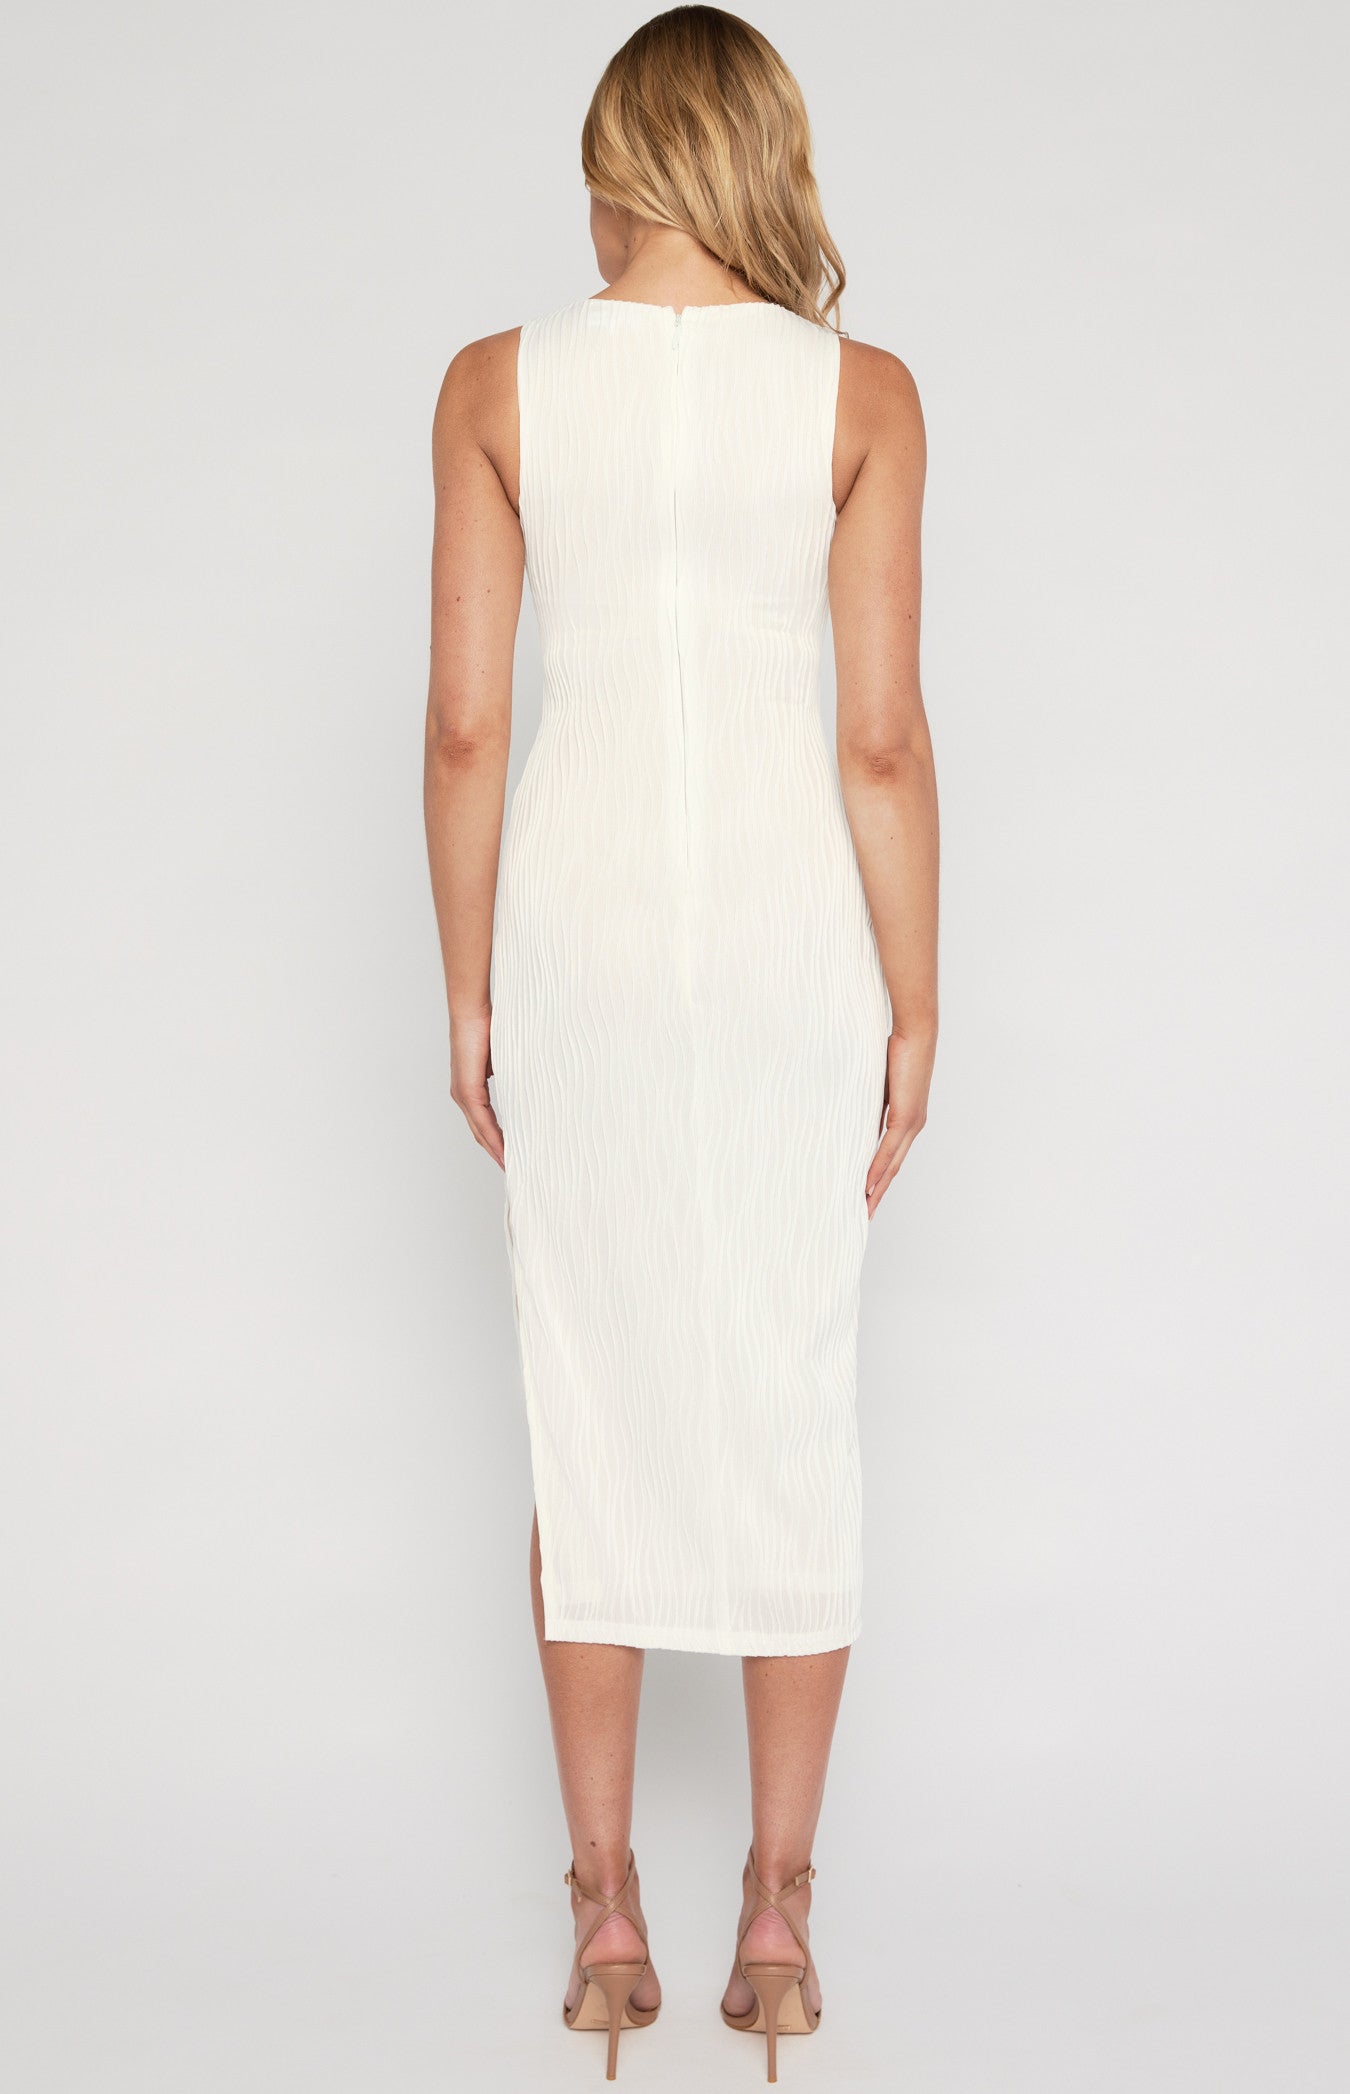 WINNIE & CO TEXTURED STRETCH MIDI DRESS WITH FRONT CUT OUT DETAIL WHITE